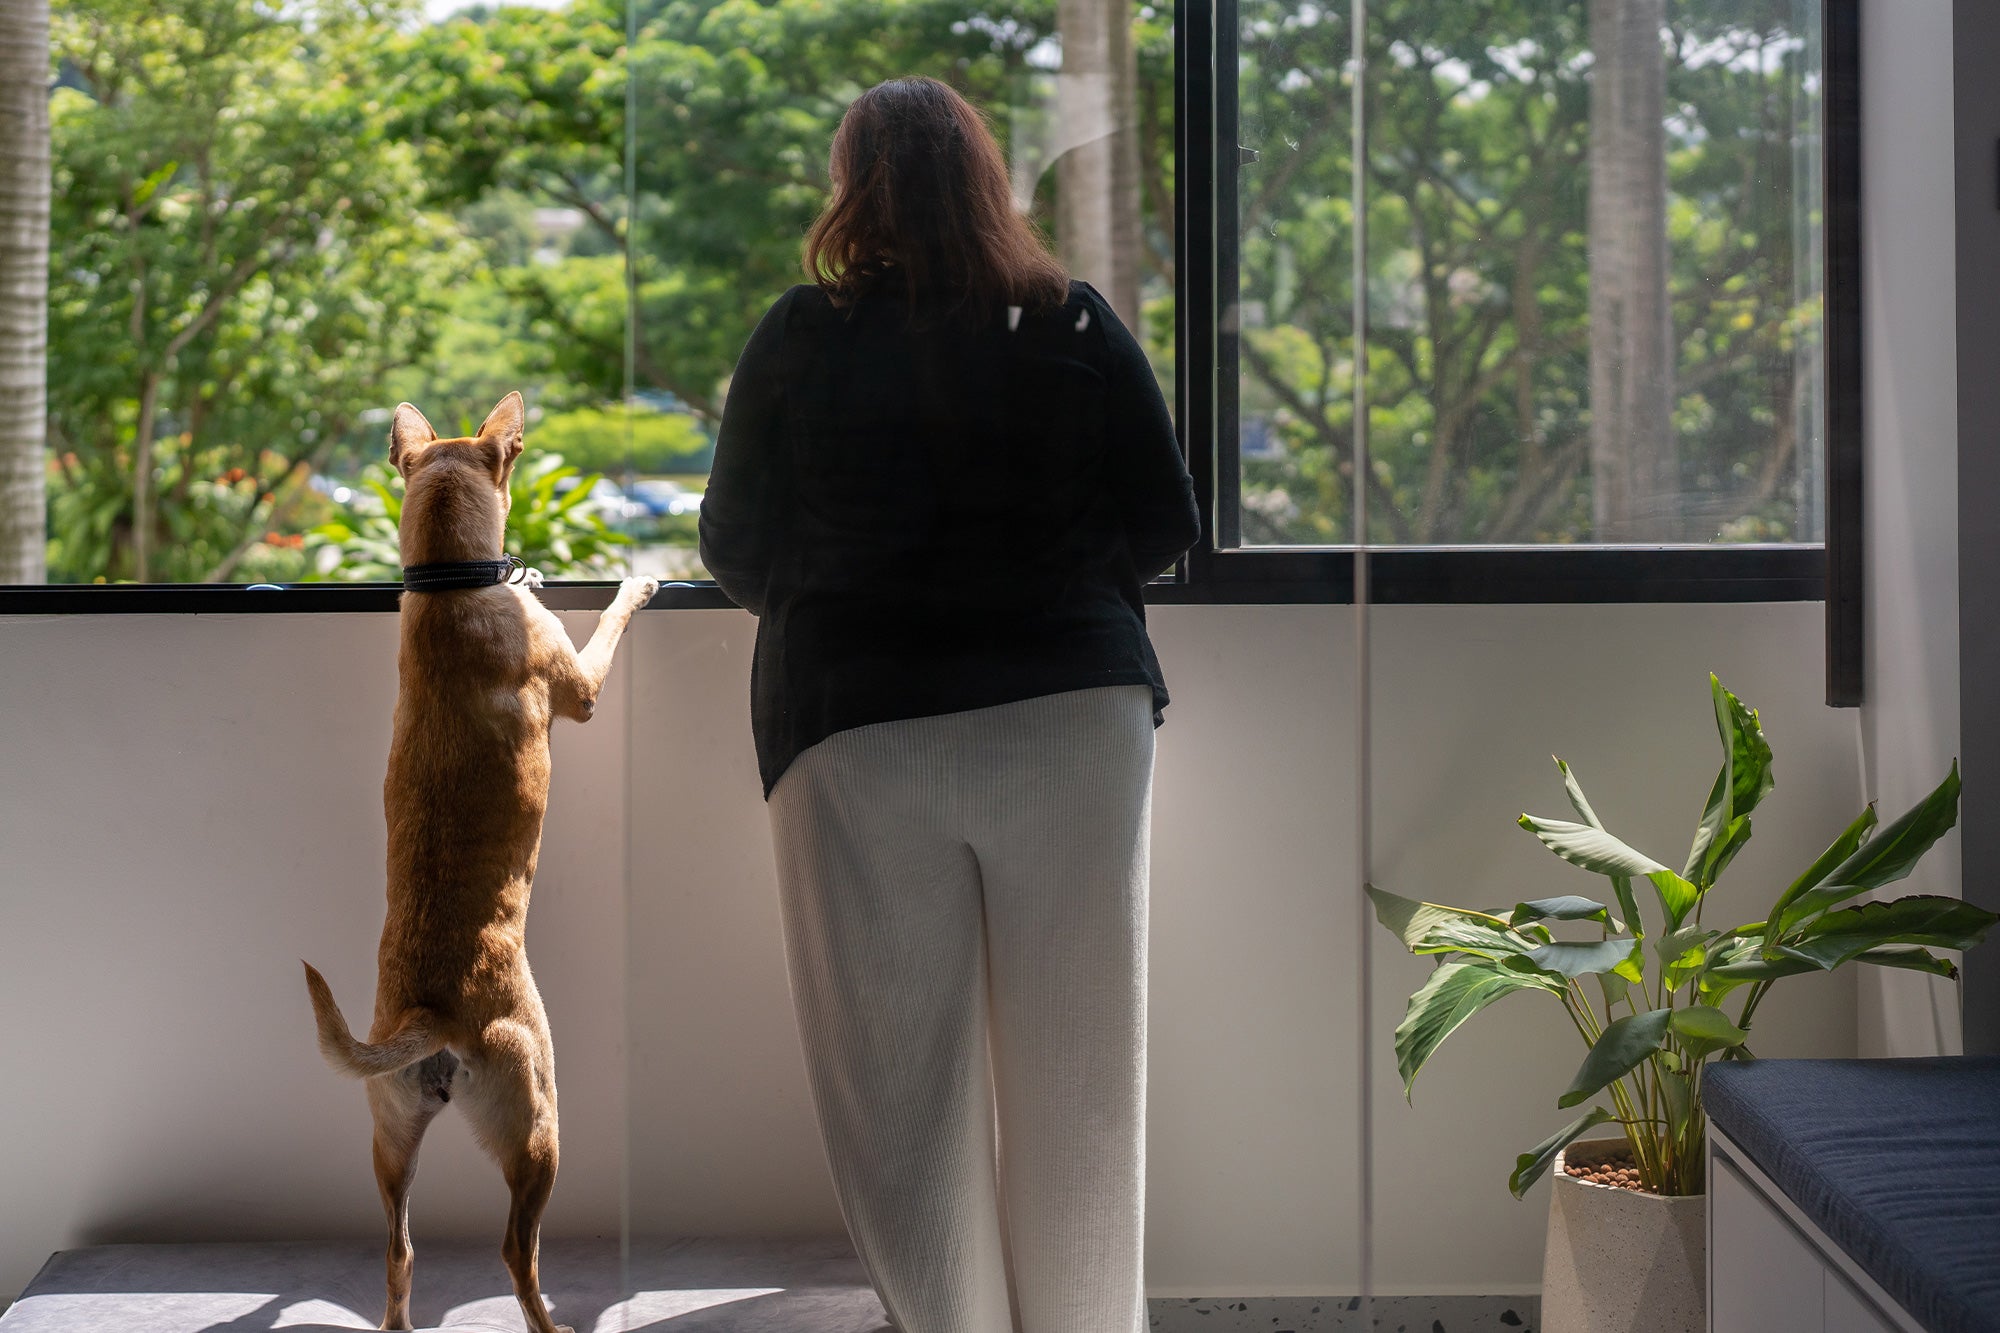 Preeti and her dog looking out of their window